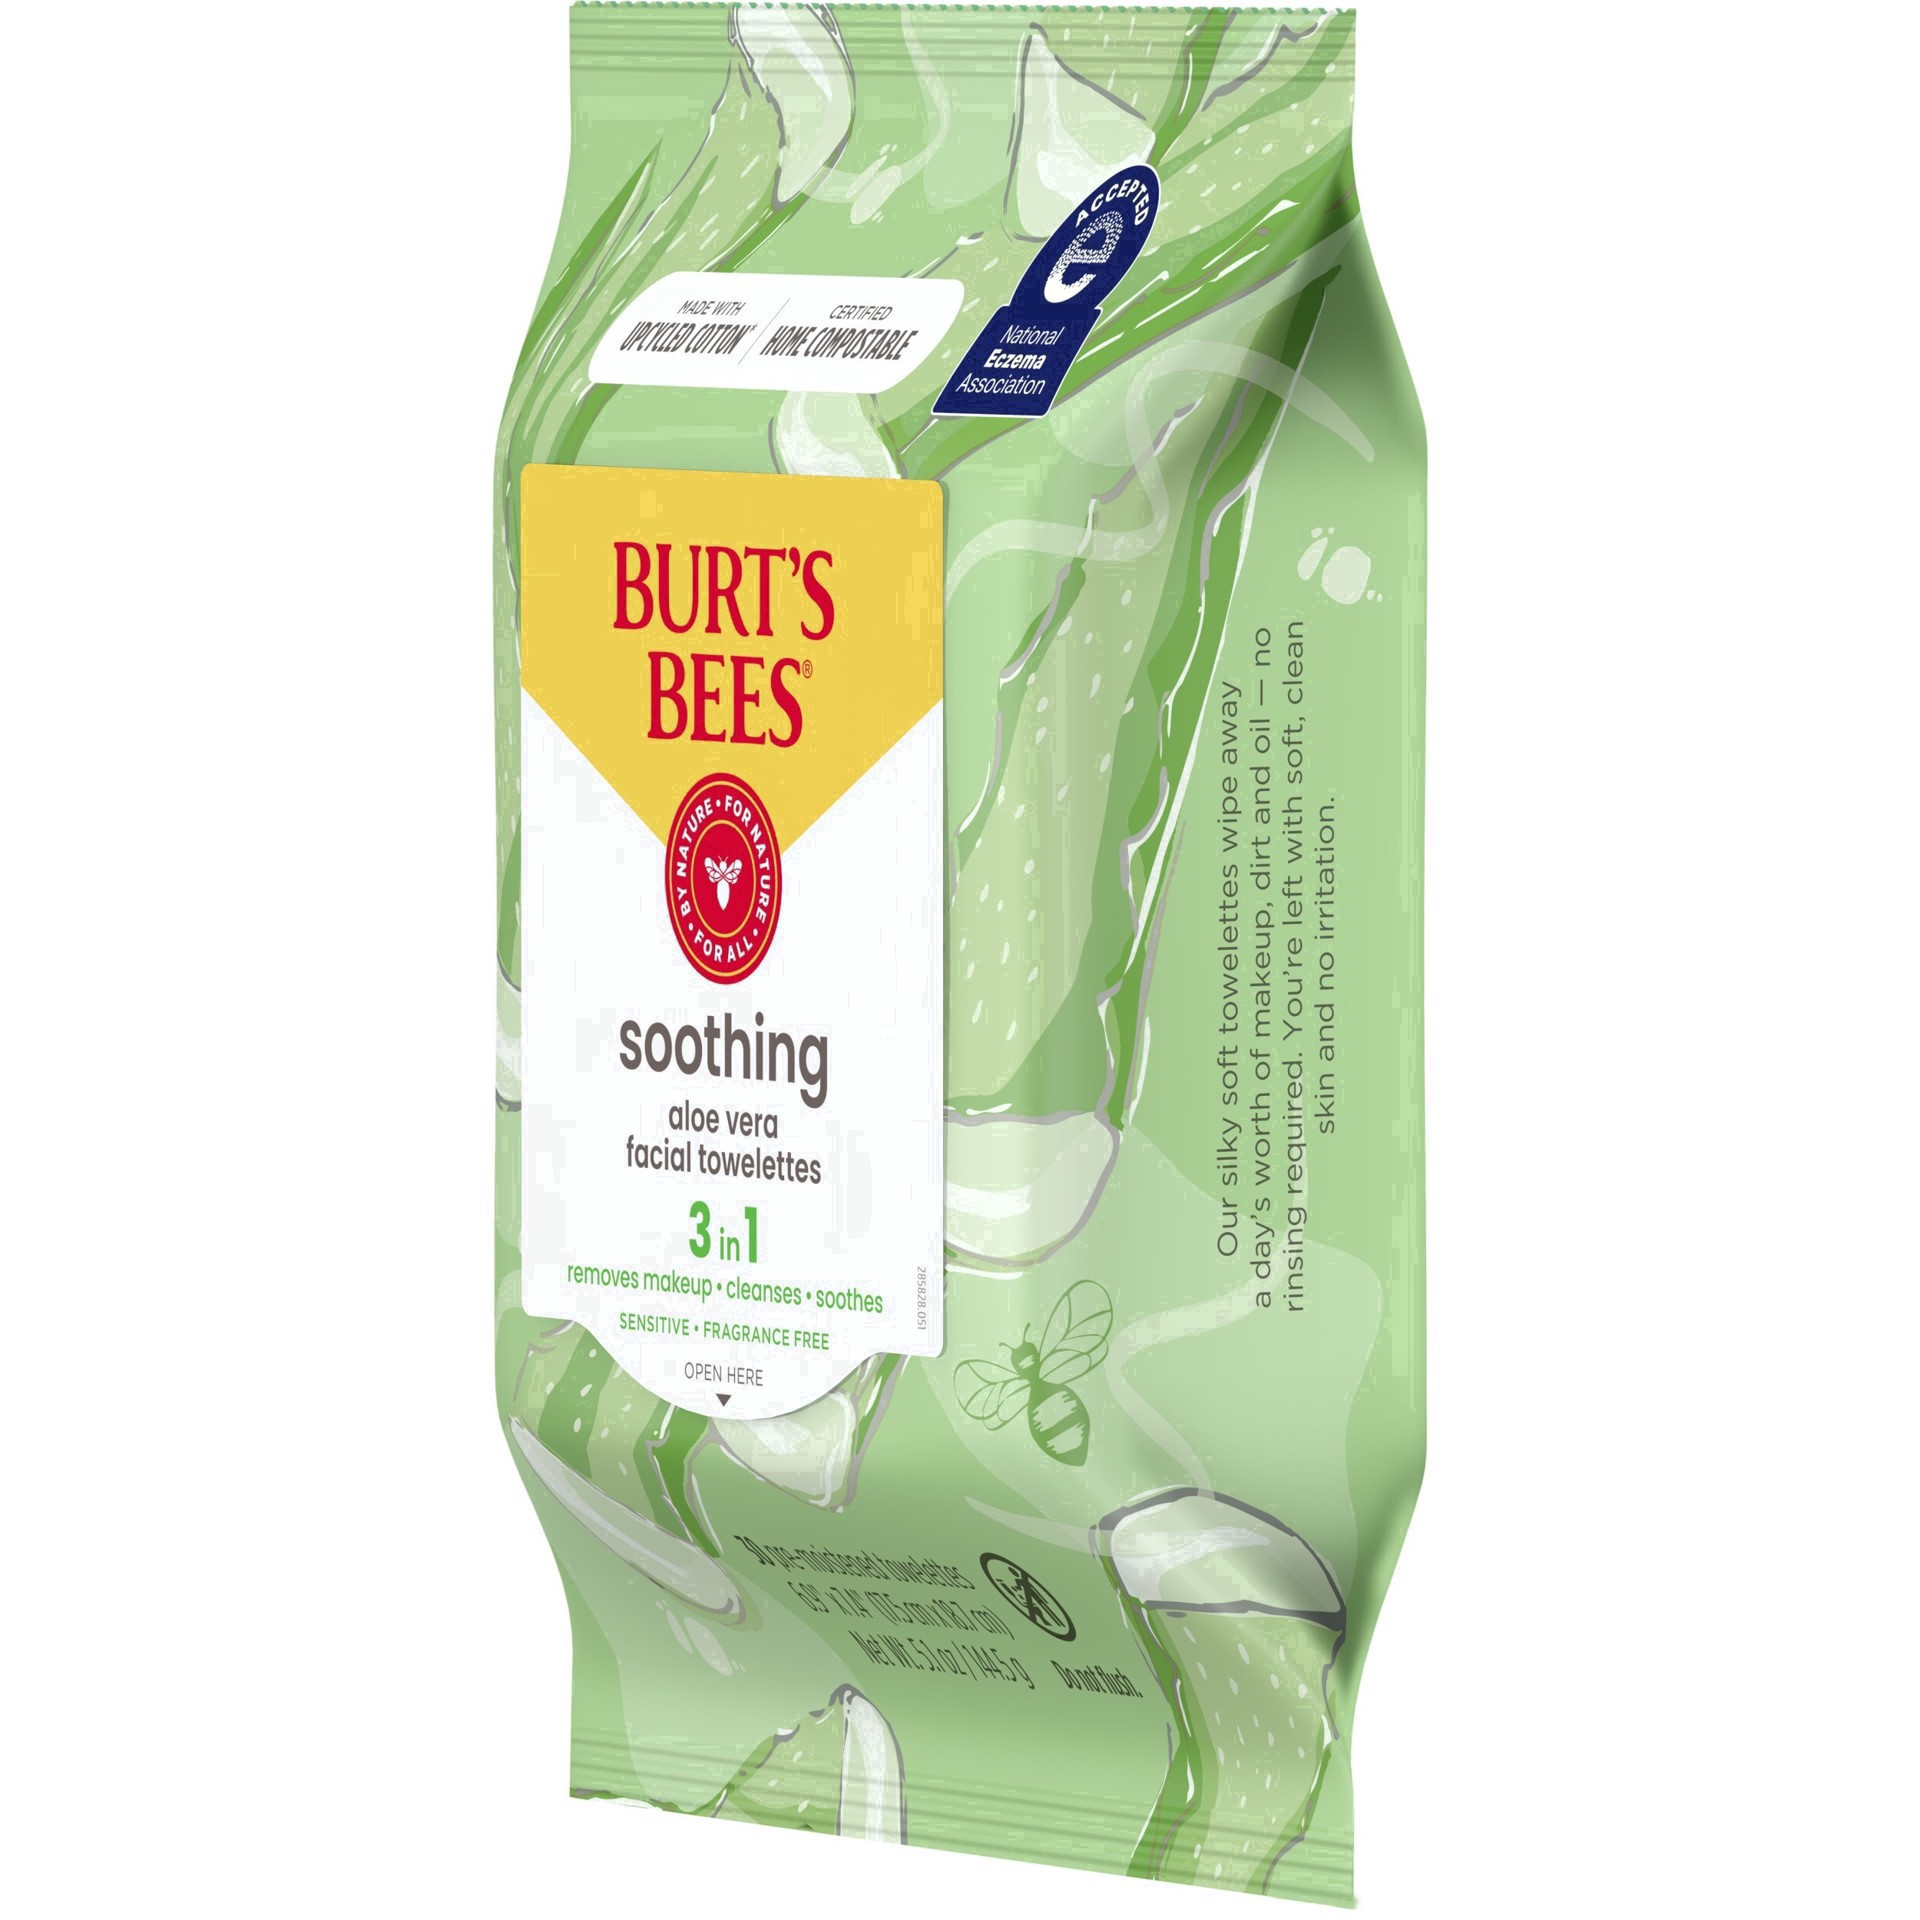 slide 71 of 137, Burt's Bees Soothing Facial Cleanser and Makeup Remover Towelettes with Aloe Vera for Sensitive Skin, Made with Upcycled Cotton, 30 Count, 30 ct